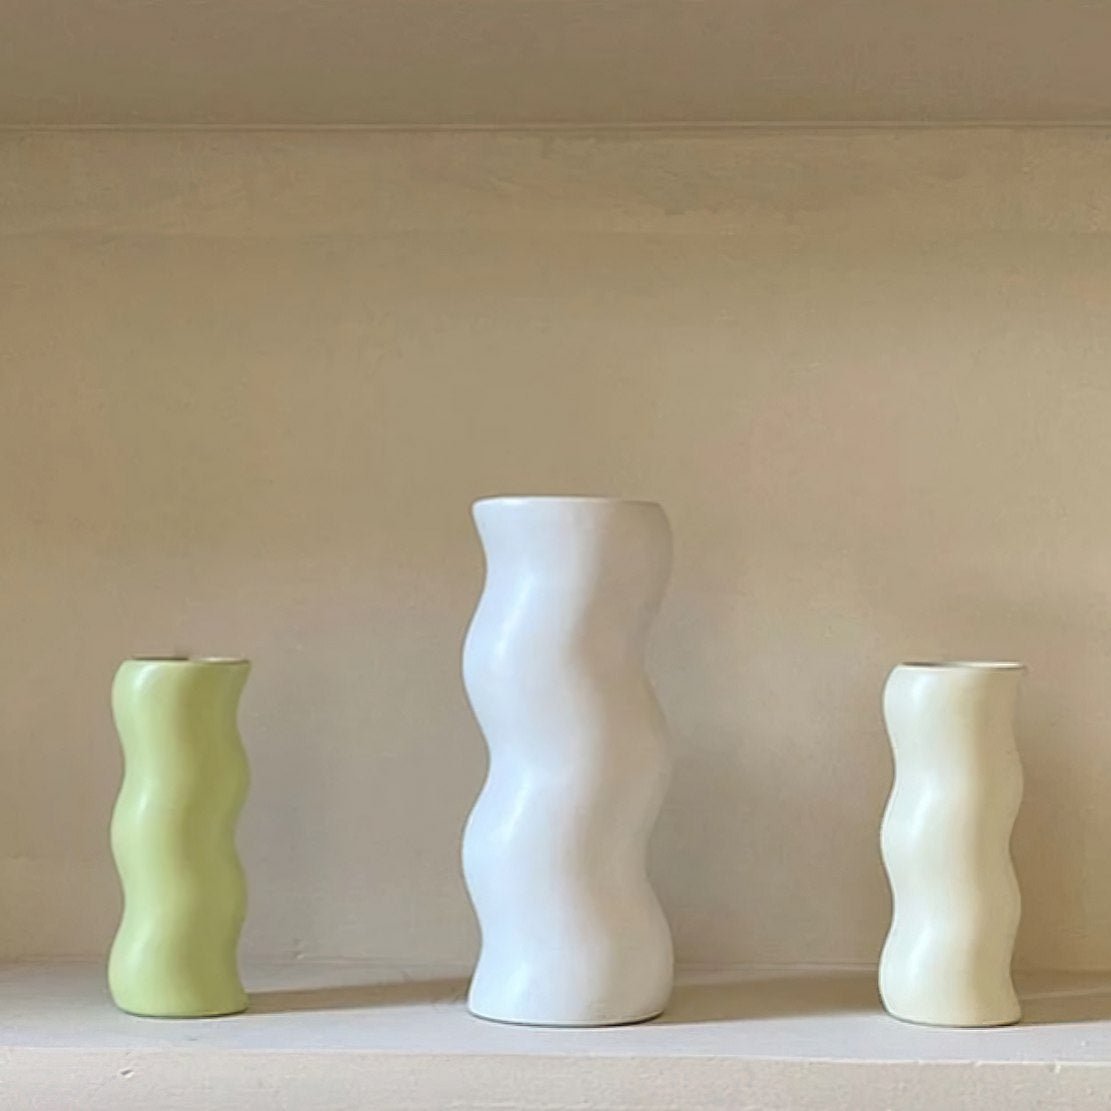 Green, white and beige ceramic wiggle vases